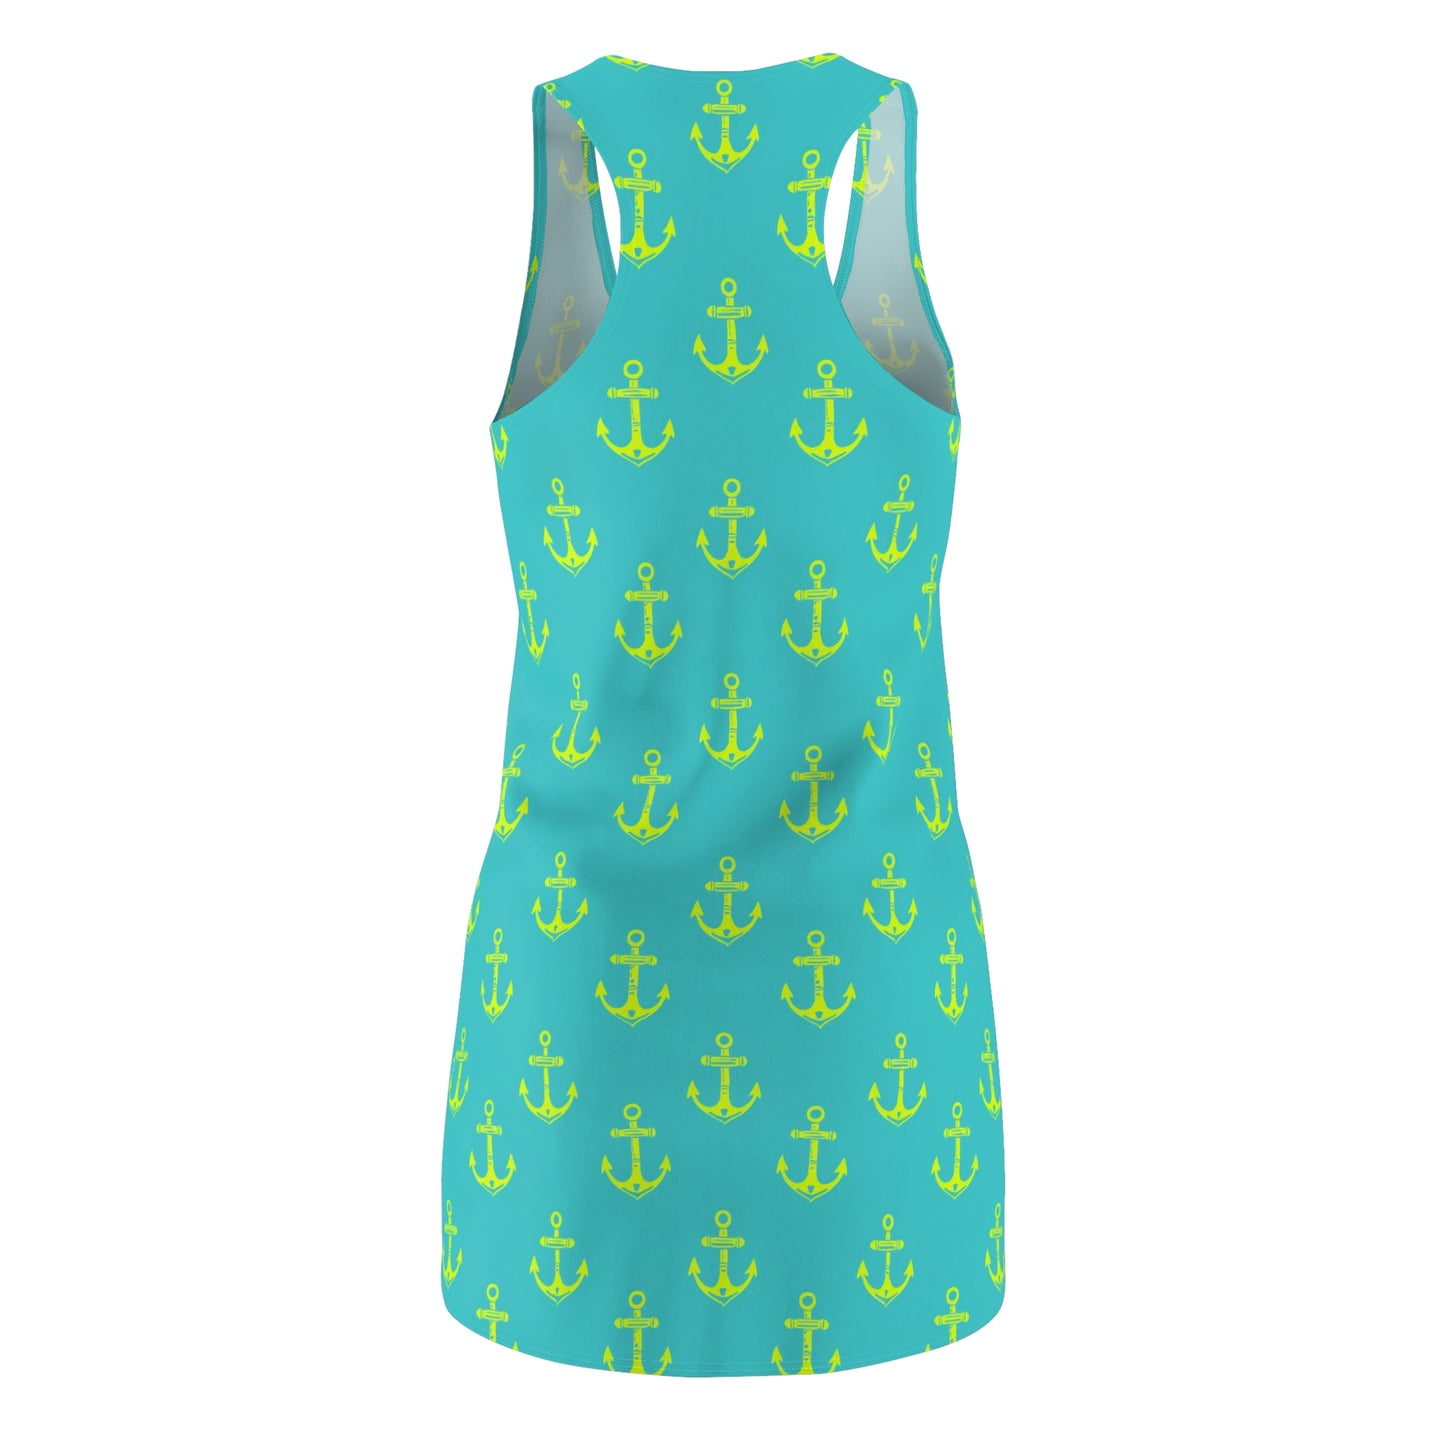 Anchors Away Surface Beach Volleyball Club Cover Up Racerback Dress